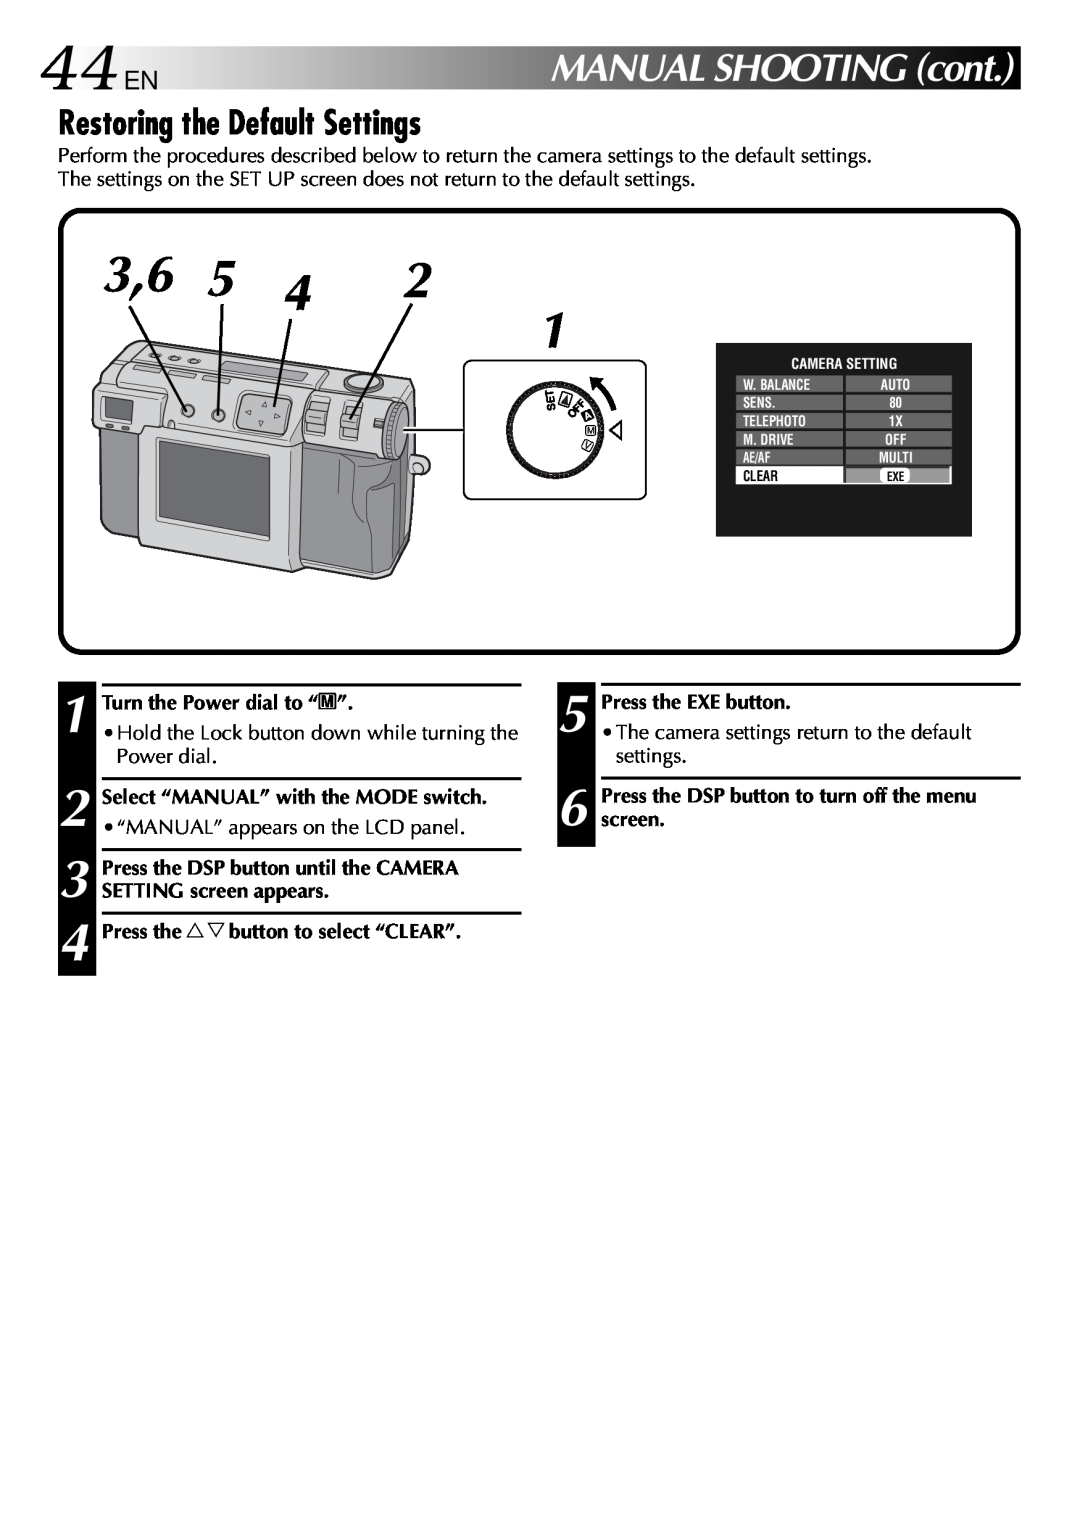 JVC GC-QX3 manual 44ENMANUALSHOOTINGcont, Restoring the Default Settings, Turn the Power dial to “M”, Press the EXE button 